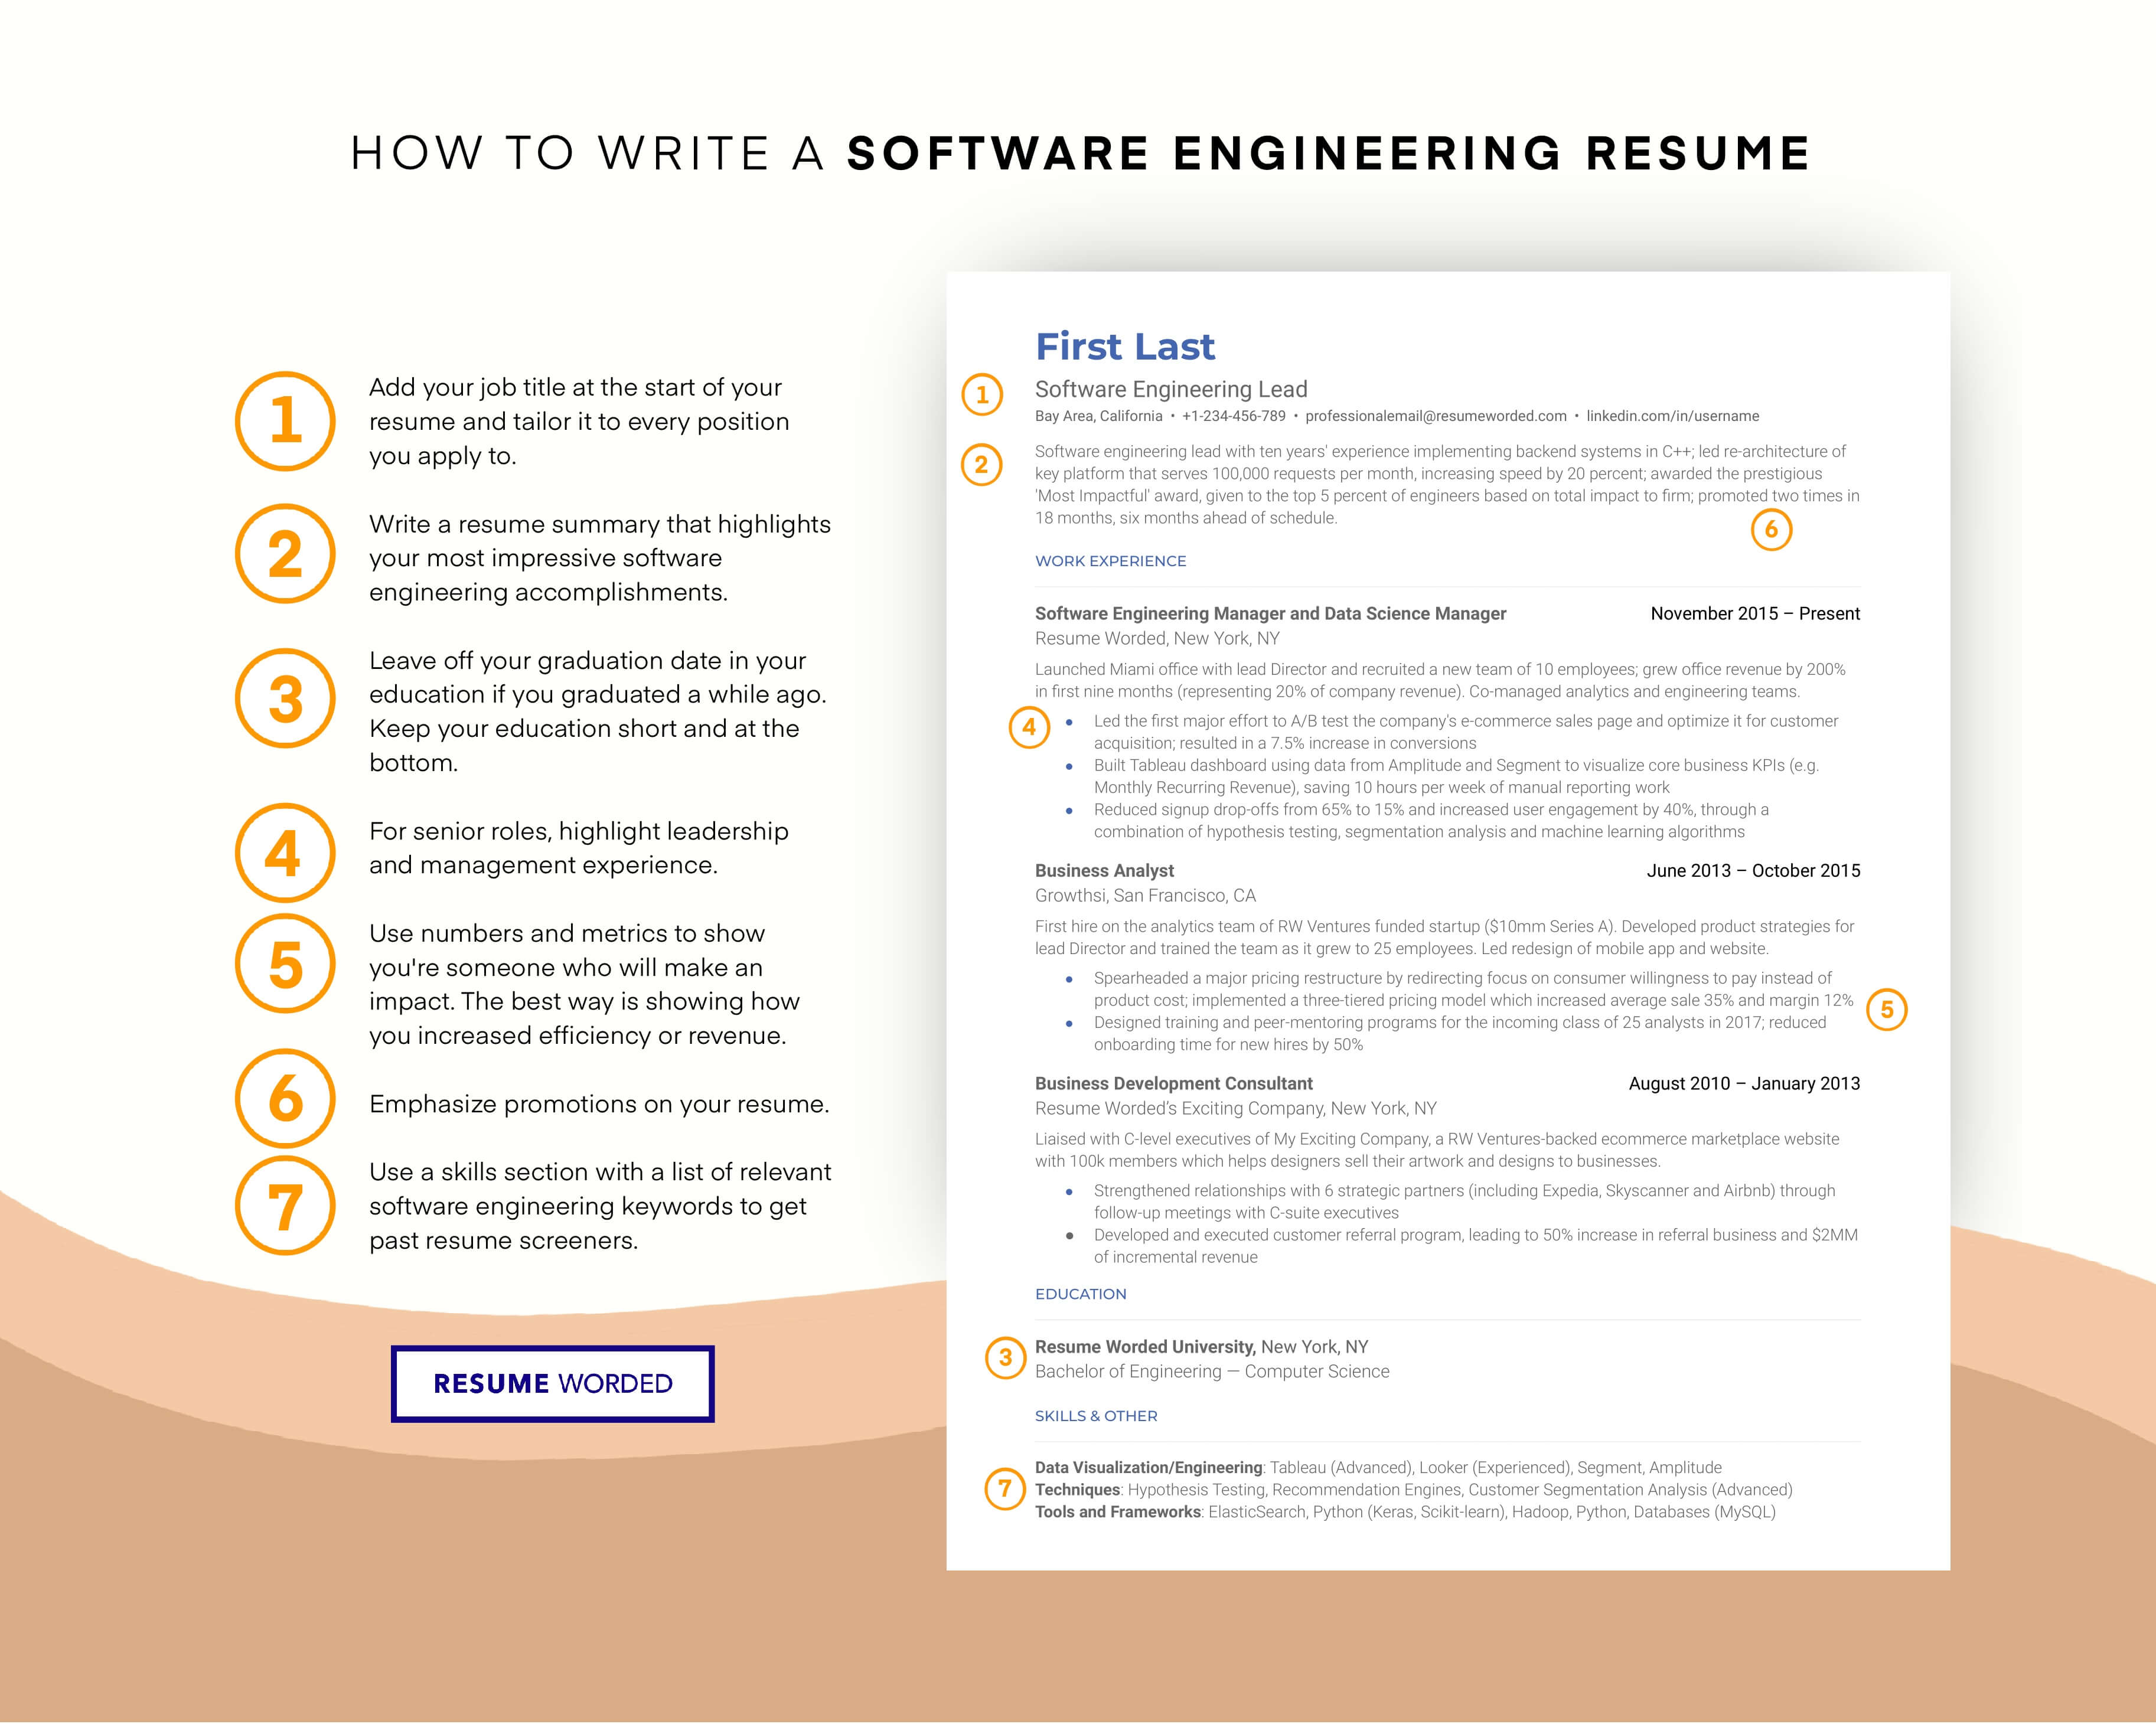 Emphasize on your proficiency in new programming languages - Mid-Level Software Engineer CV